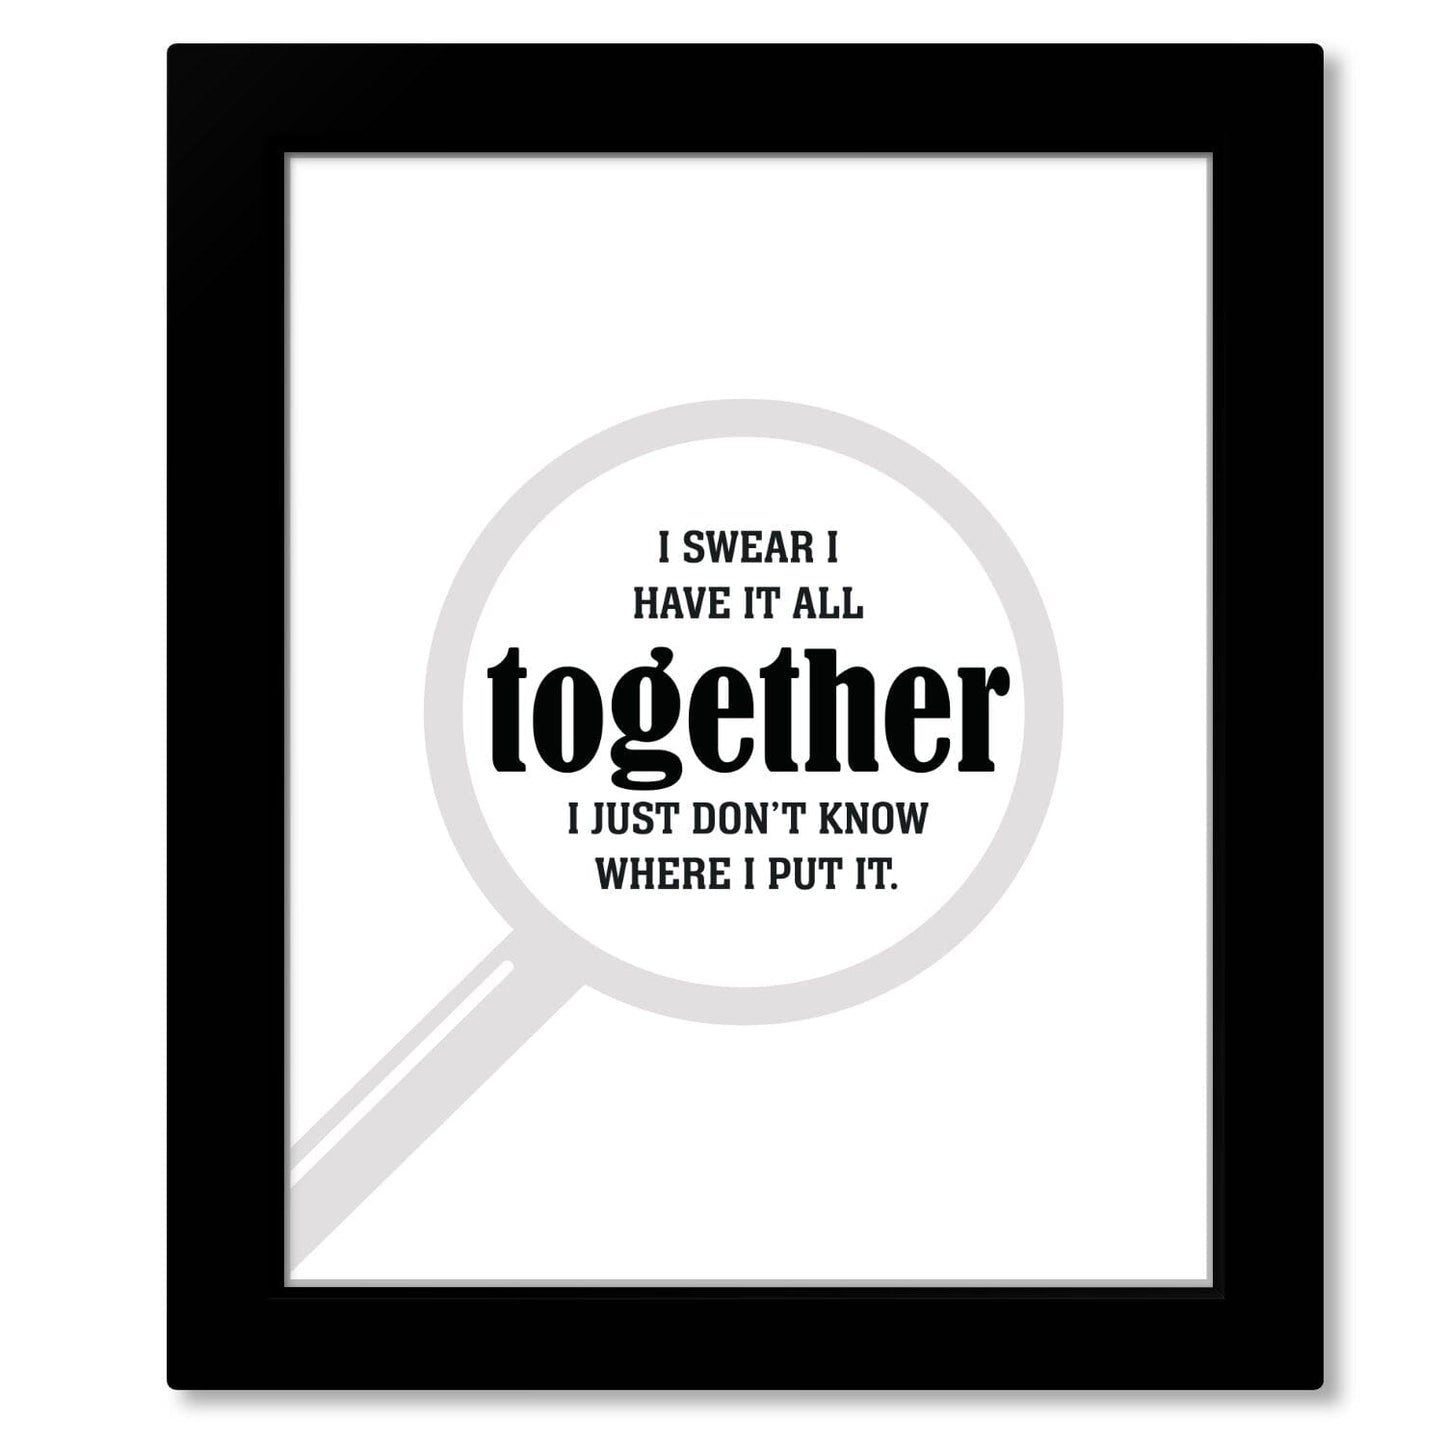 I Swear I Have it All Together - Wise and Witty Quote Print Wise and Wiseass Quotes Song Lyrics Art 